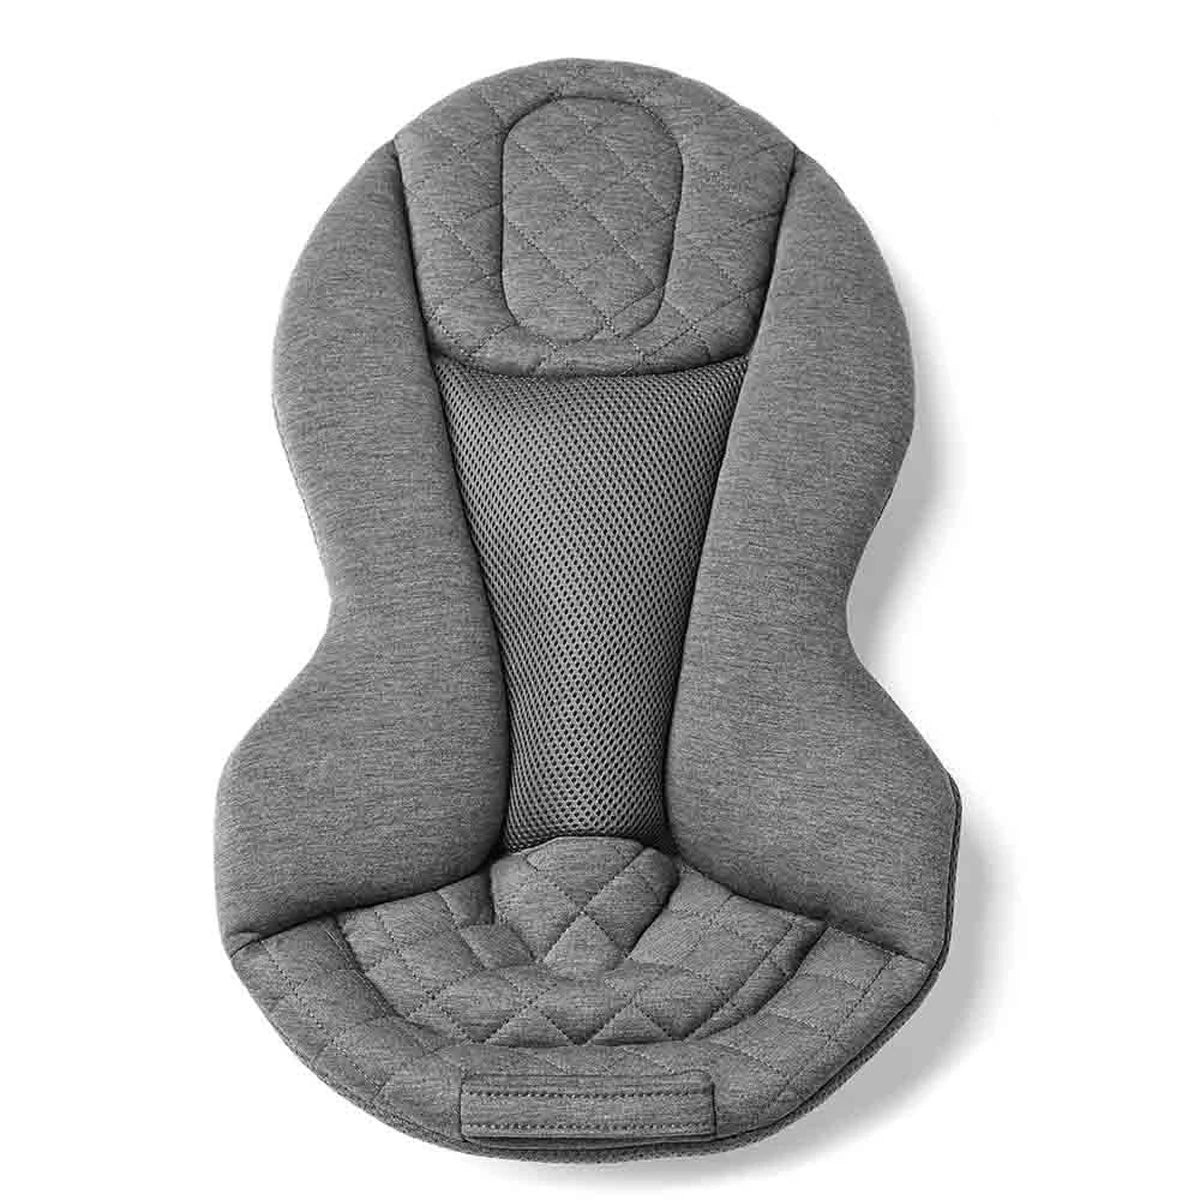 Ergobaby 3-in-1 Evolve Bouncer - Charcoal Grey 3